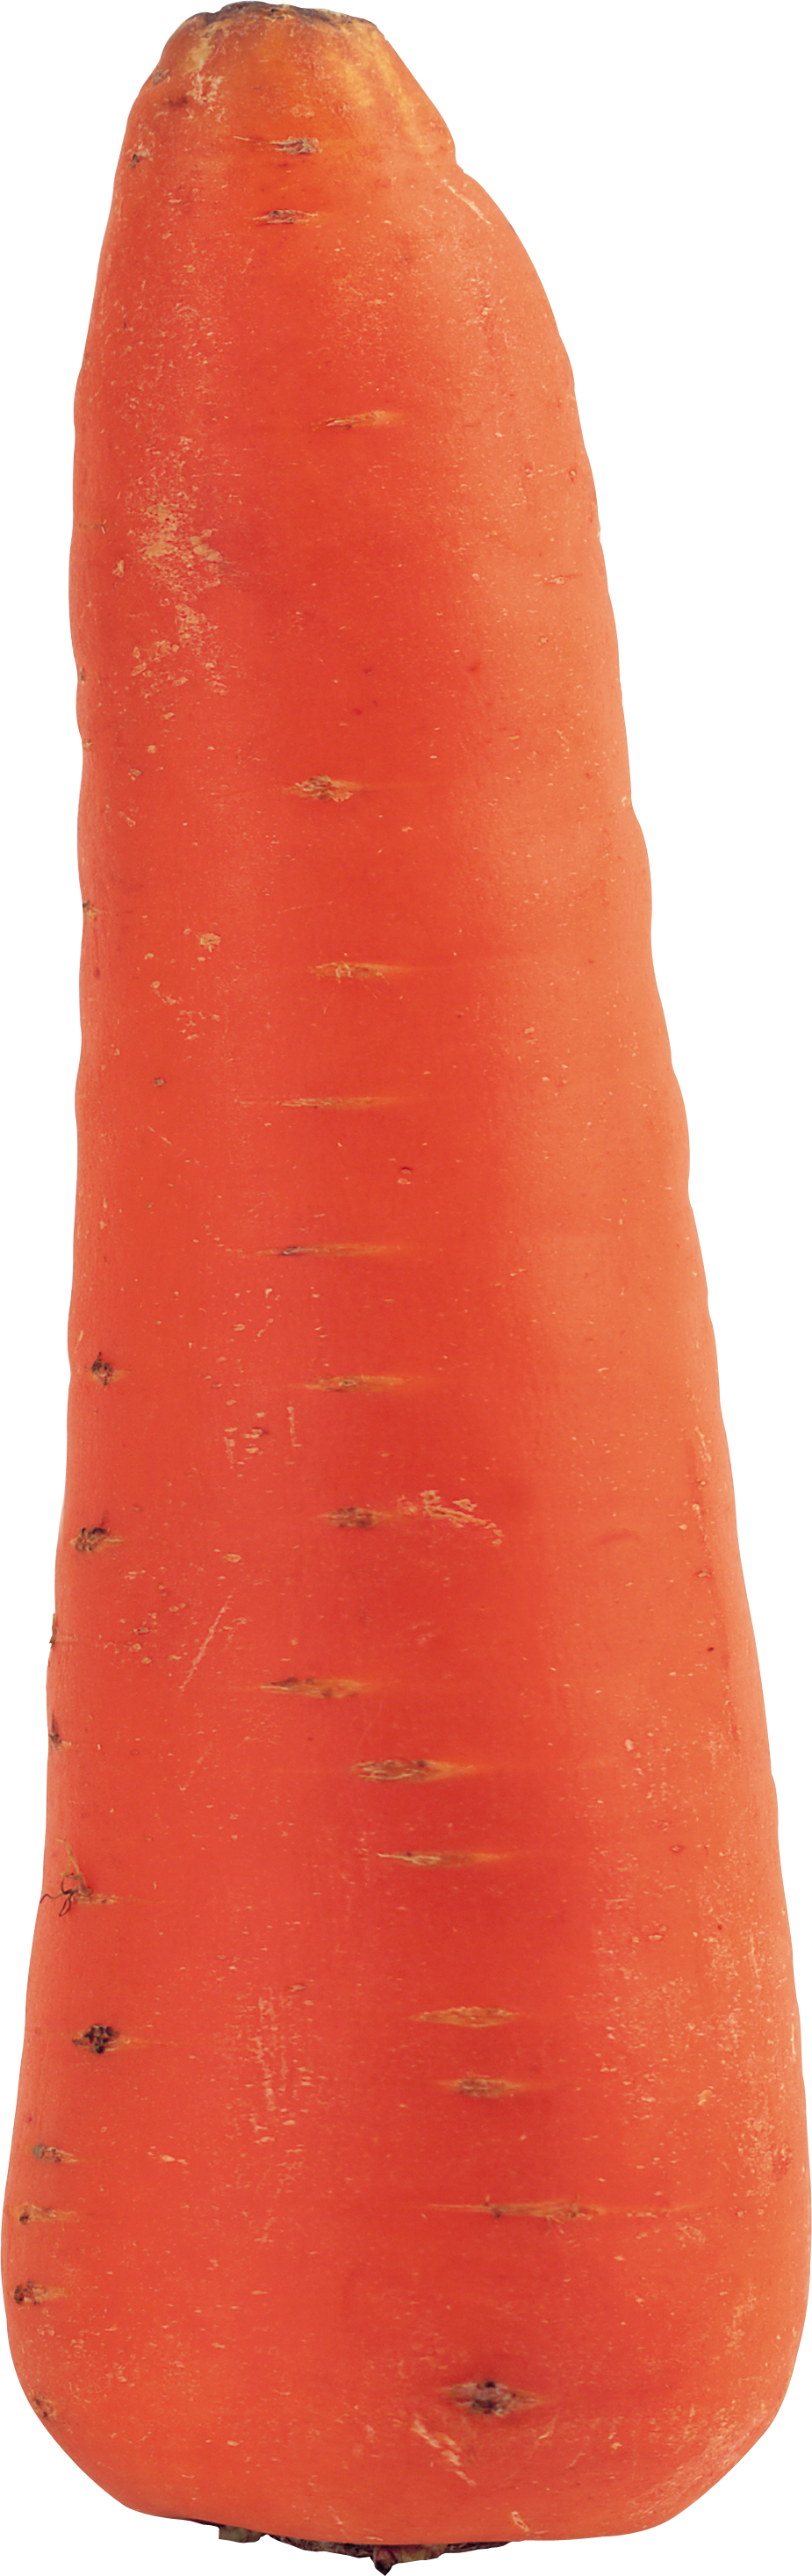 Carrot PNG